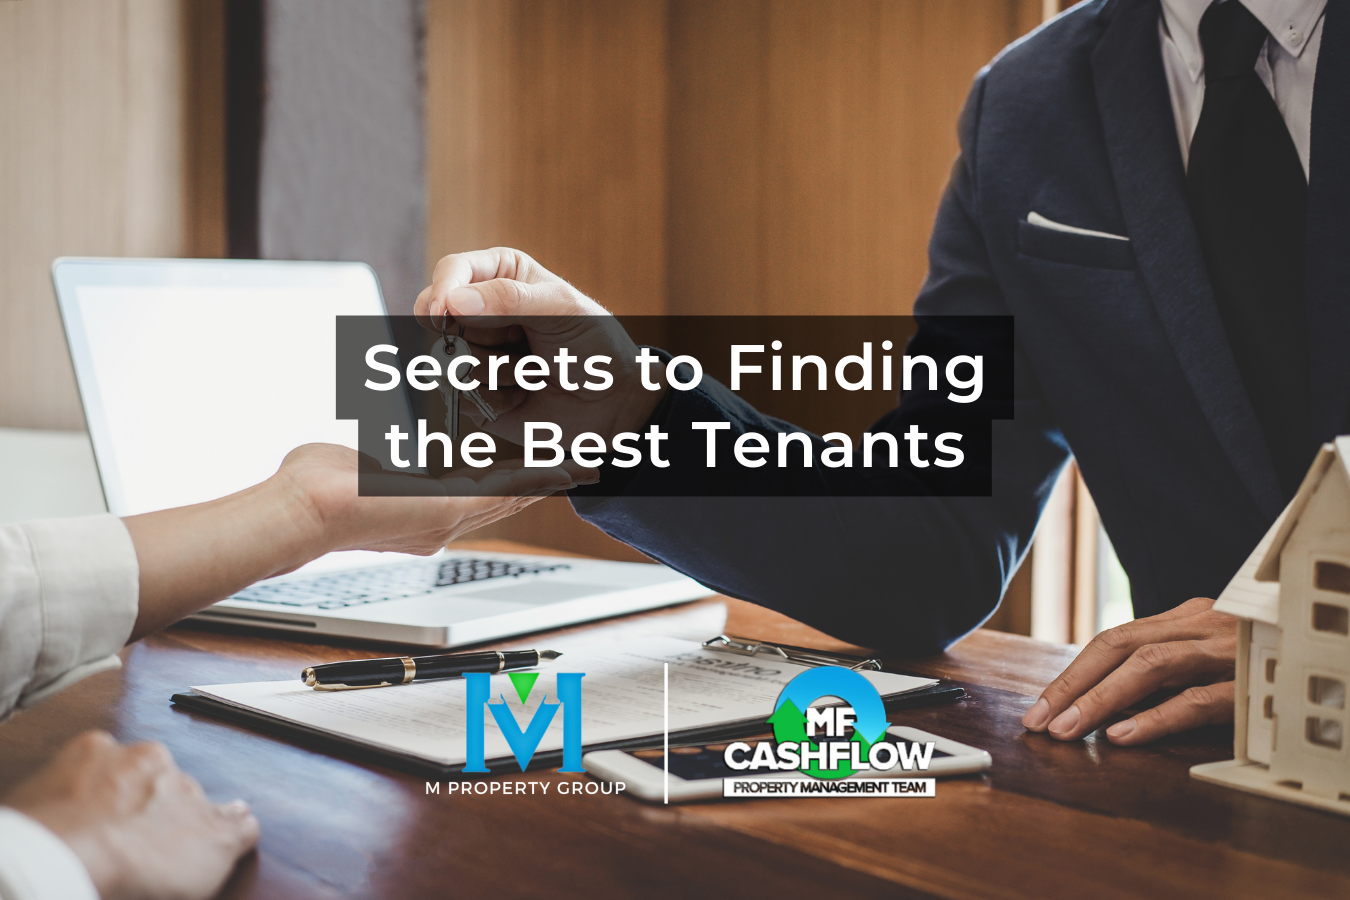 Secrets to Finding the Best Tenants